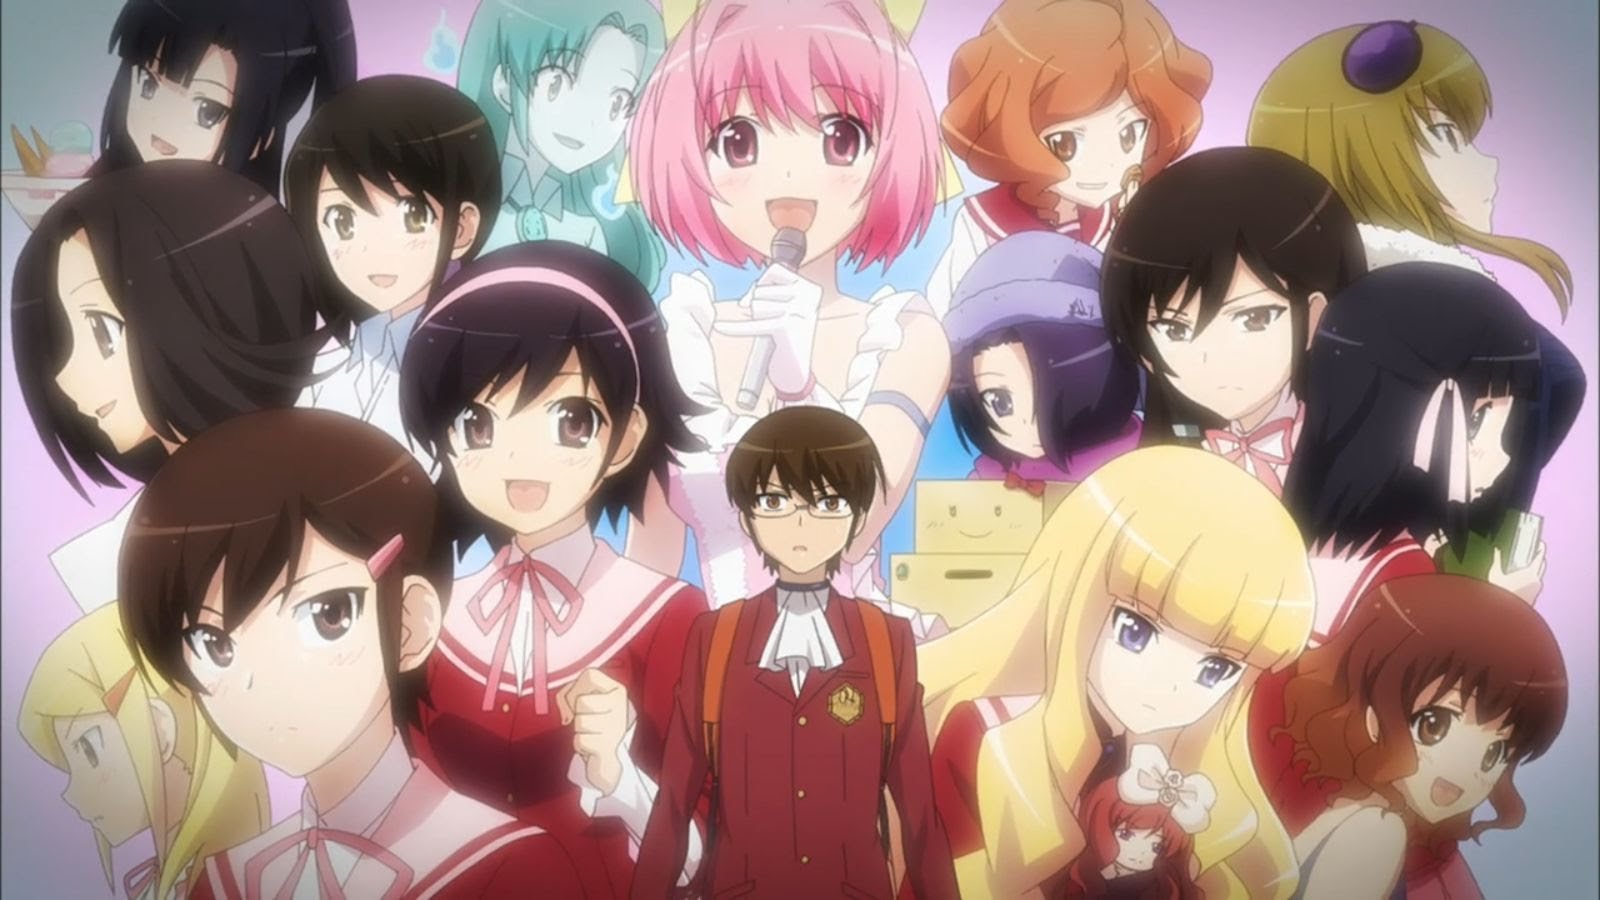 The world god only knows wallpaper